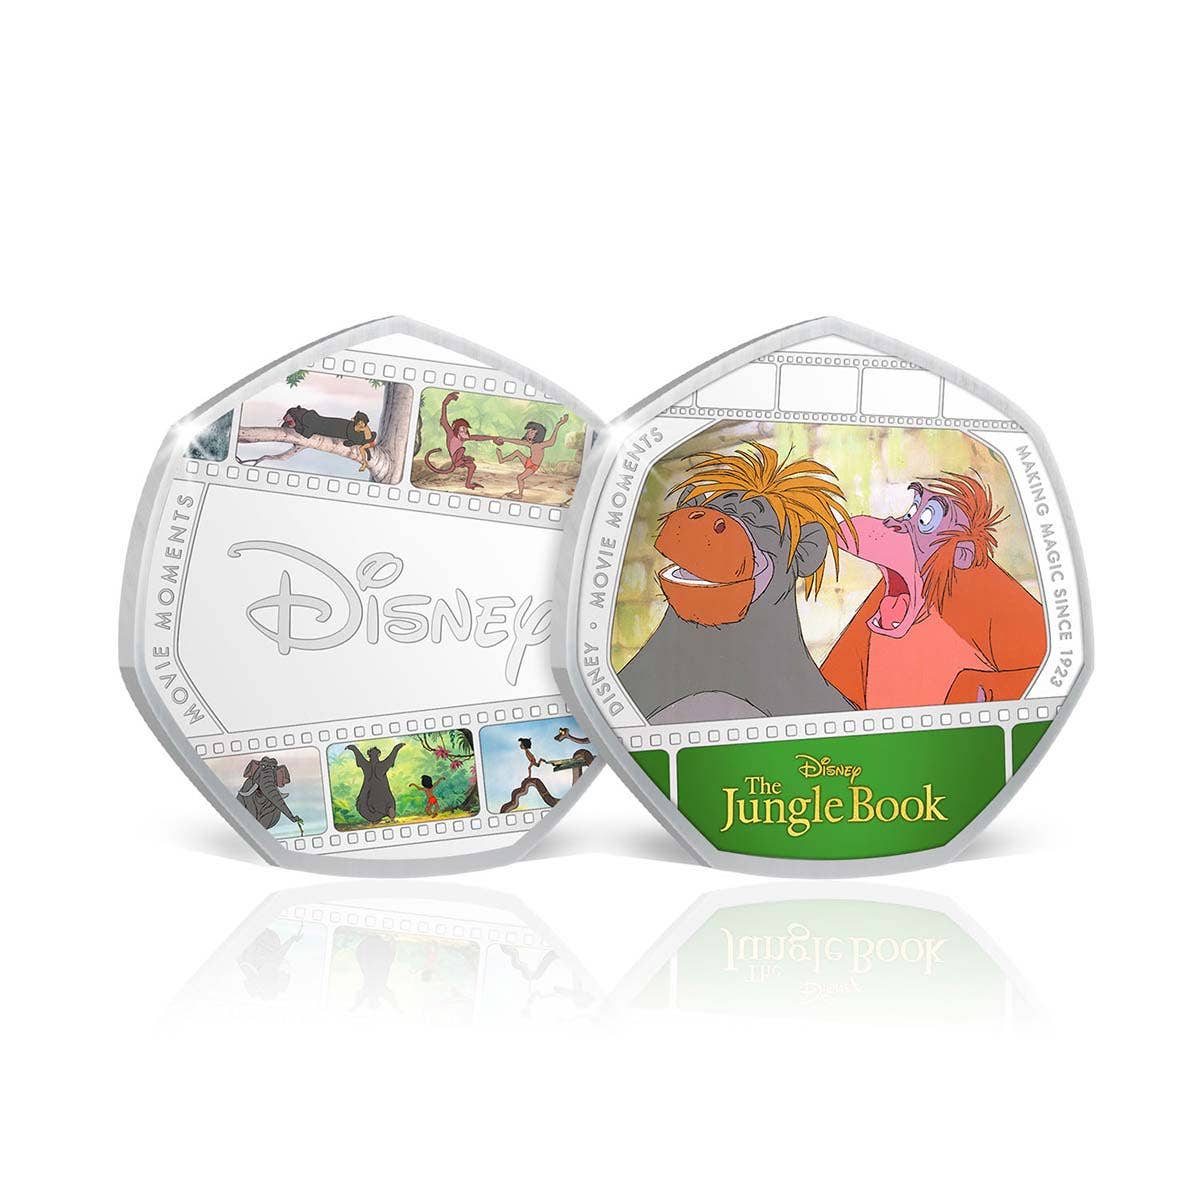 The Disney Movie Moments Complete Set - Jungle Book